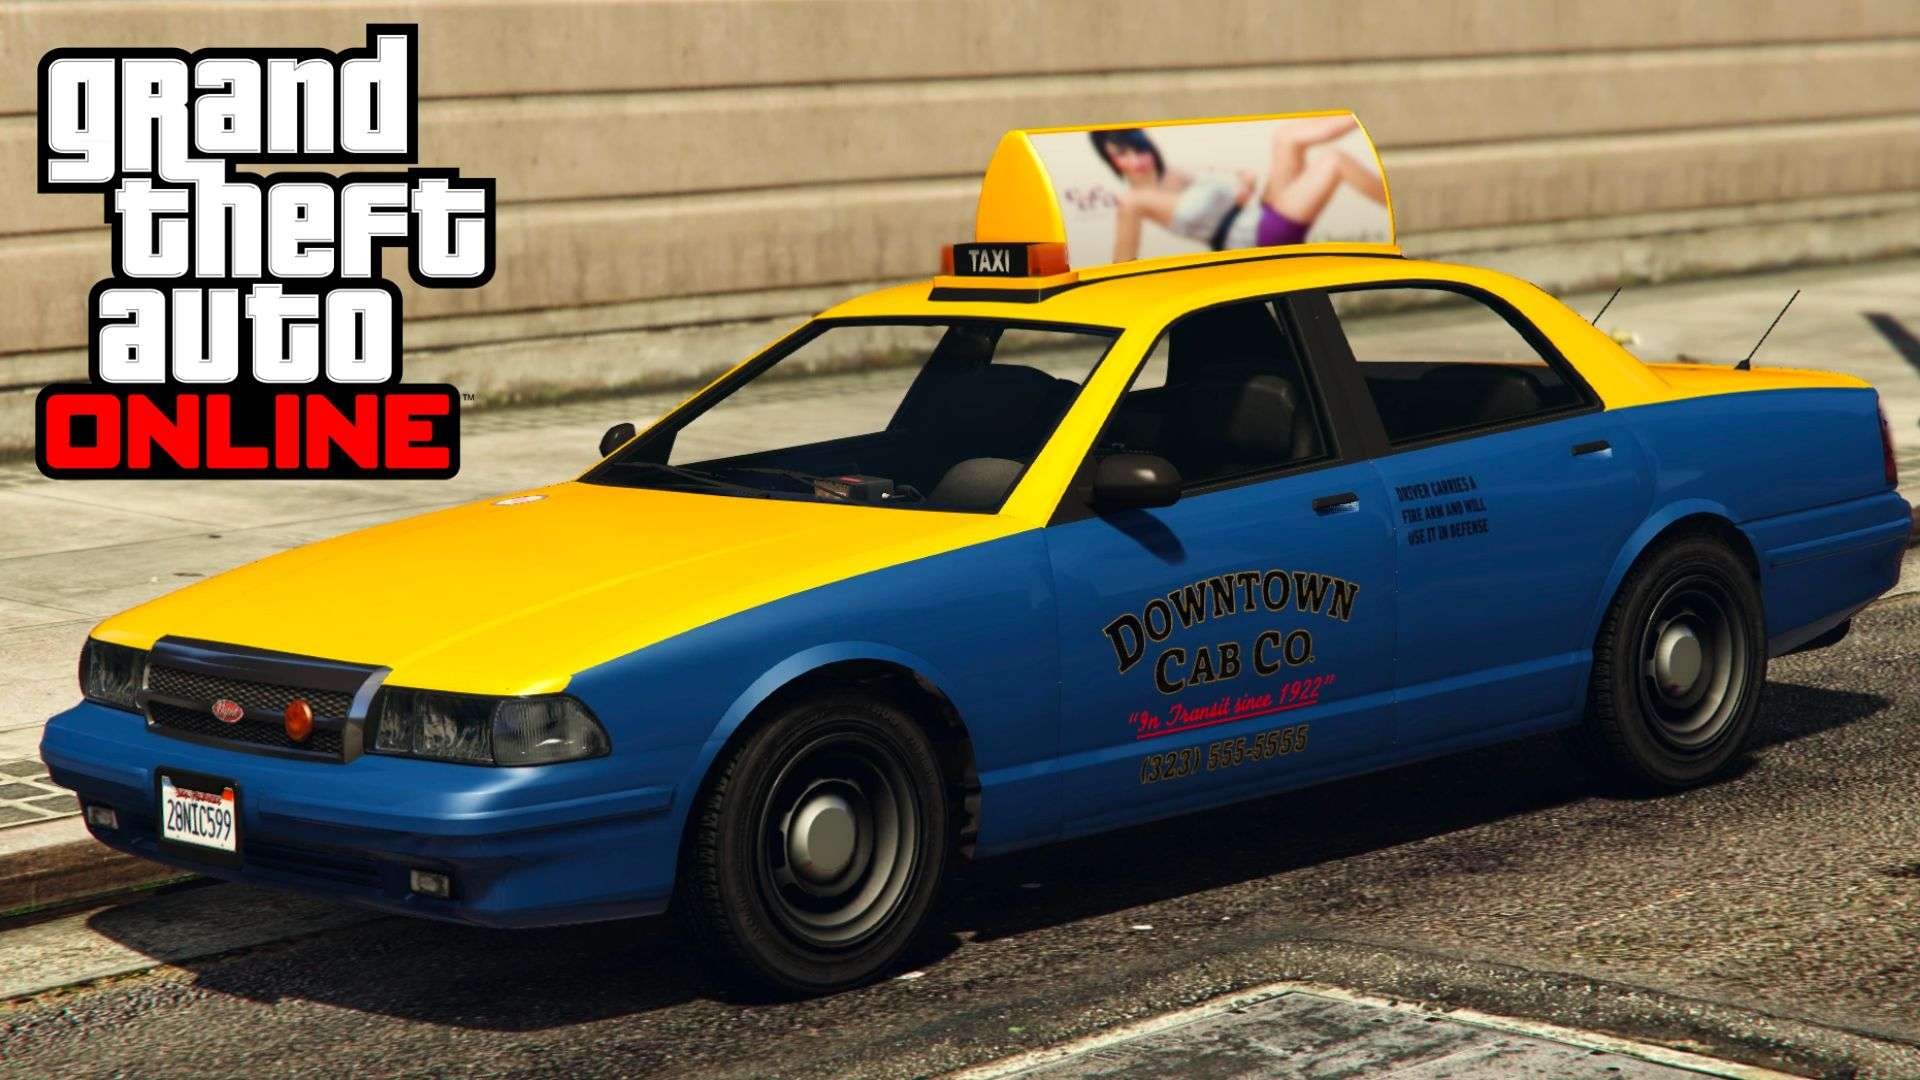 Yellow and blue taxi in GTA Online parked up